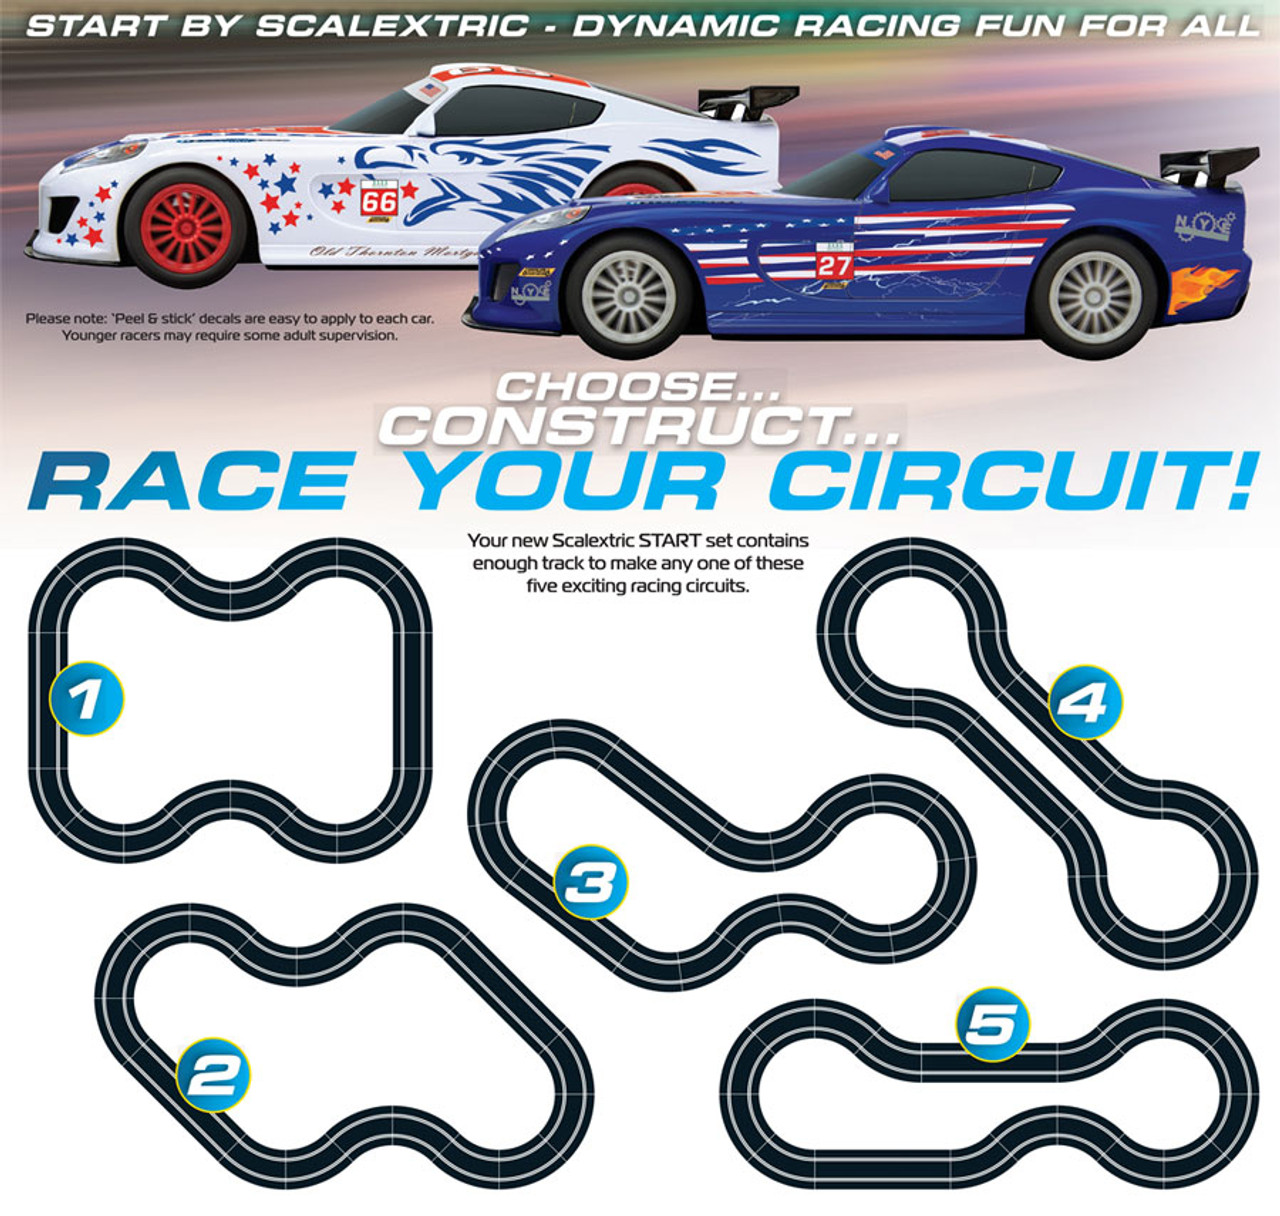 NEW* Gran Turismo Circuit Slot Car Track w/ Two 1:32 Scale Cars